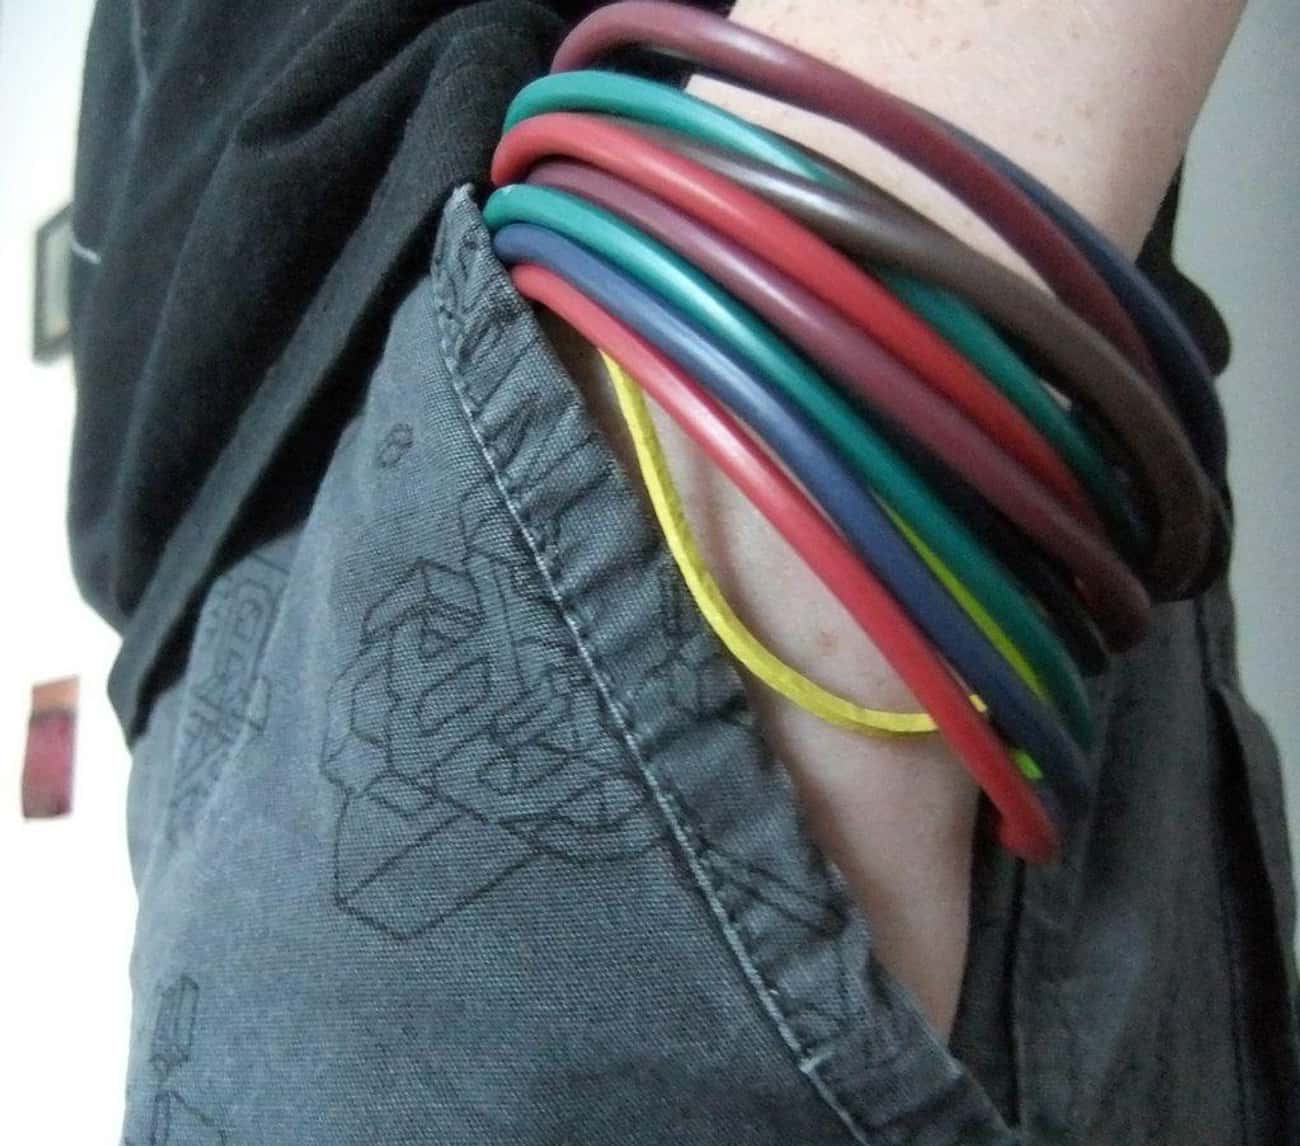 Each Bracelet Color Was Said To Signal A Different Intimate Act